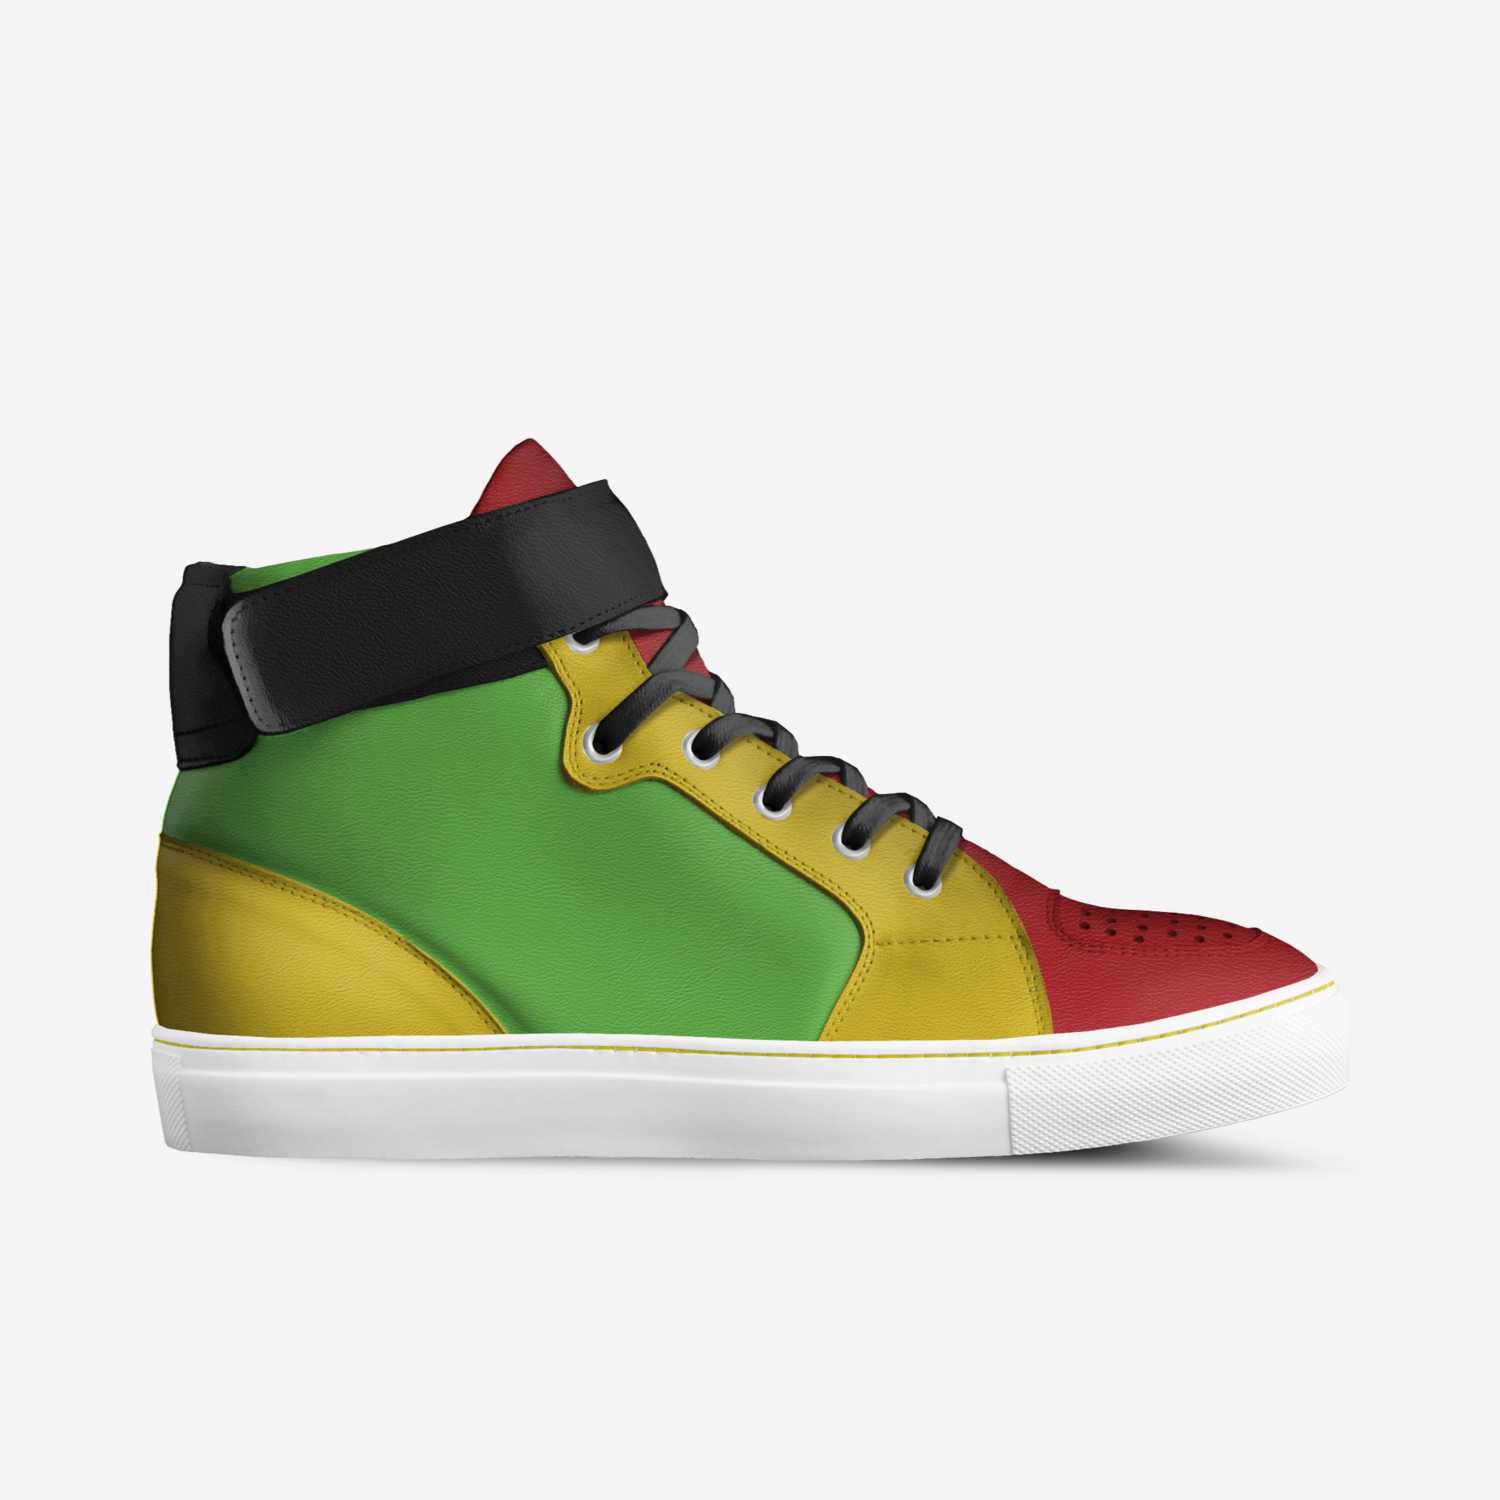 colorr custom made in Italy shoes by Austin Jackson | Side view